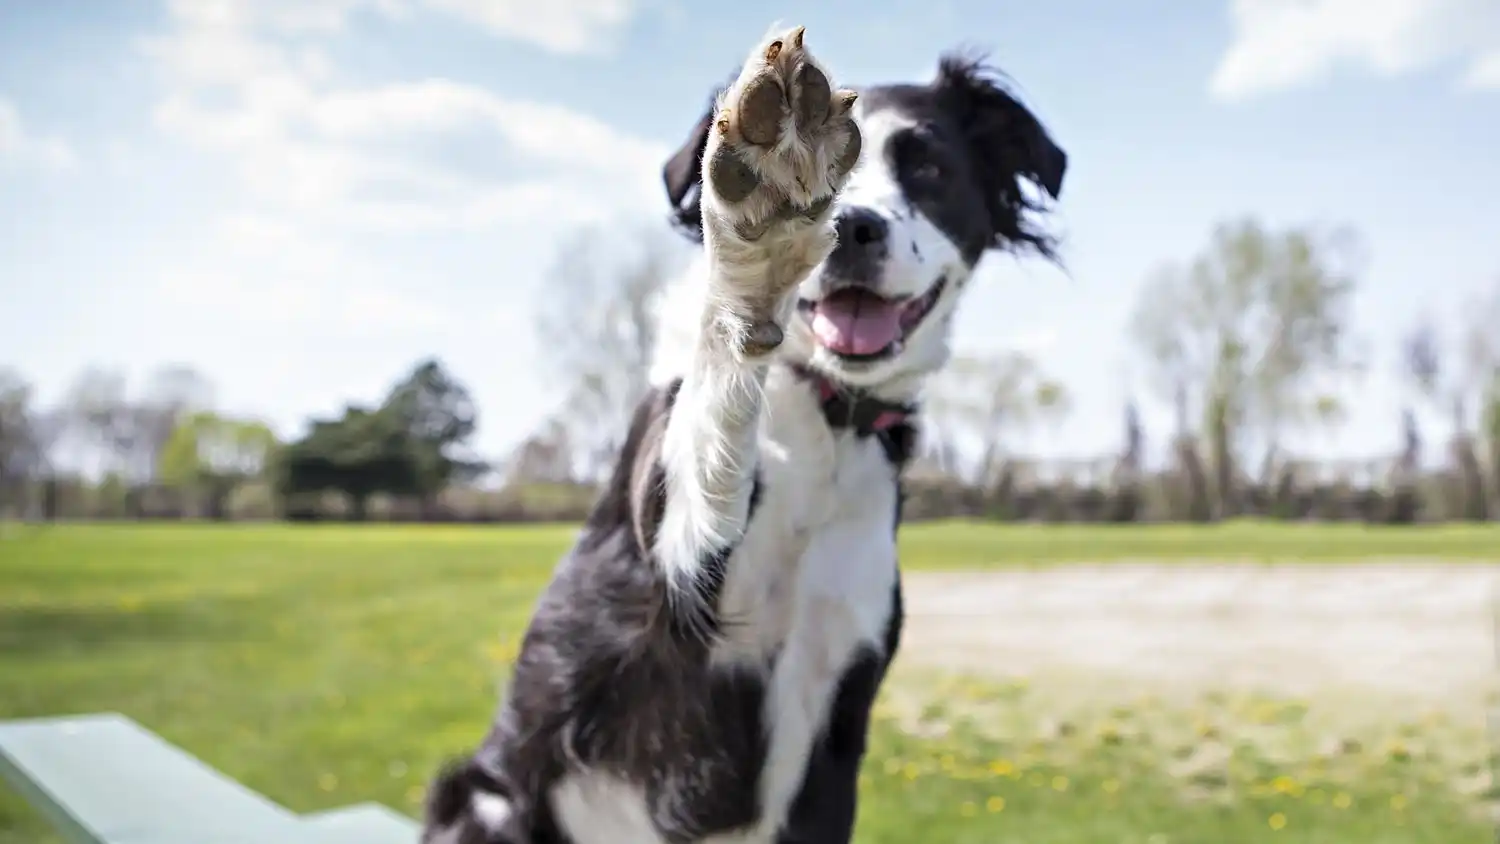 Photograph of a dog lifting its paw at the camera during a bright sunny day